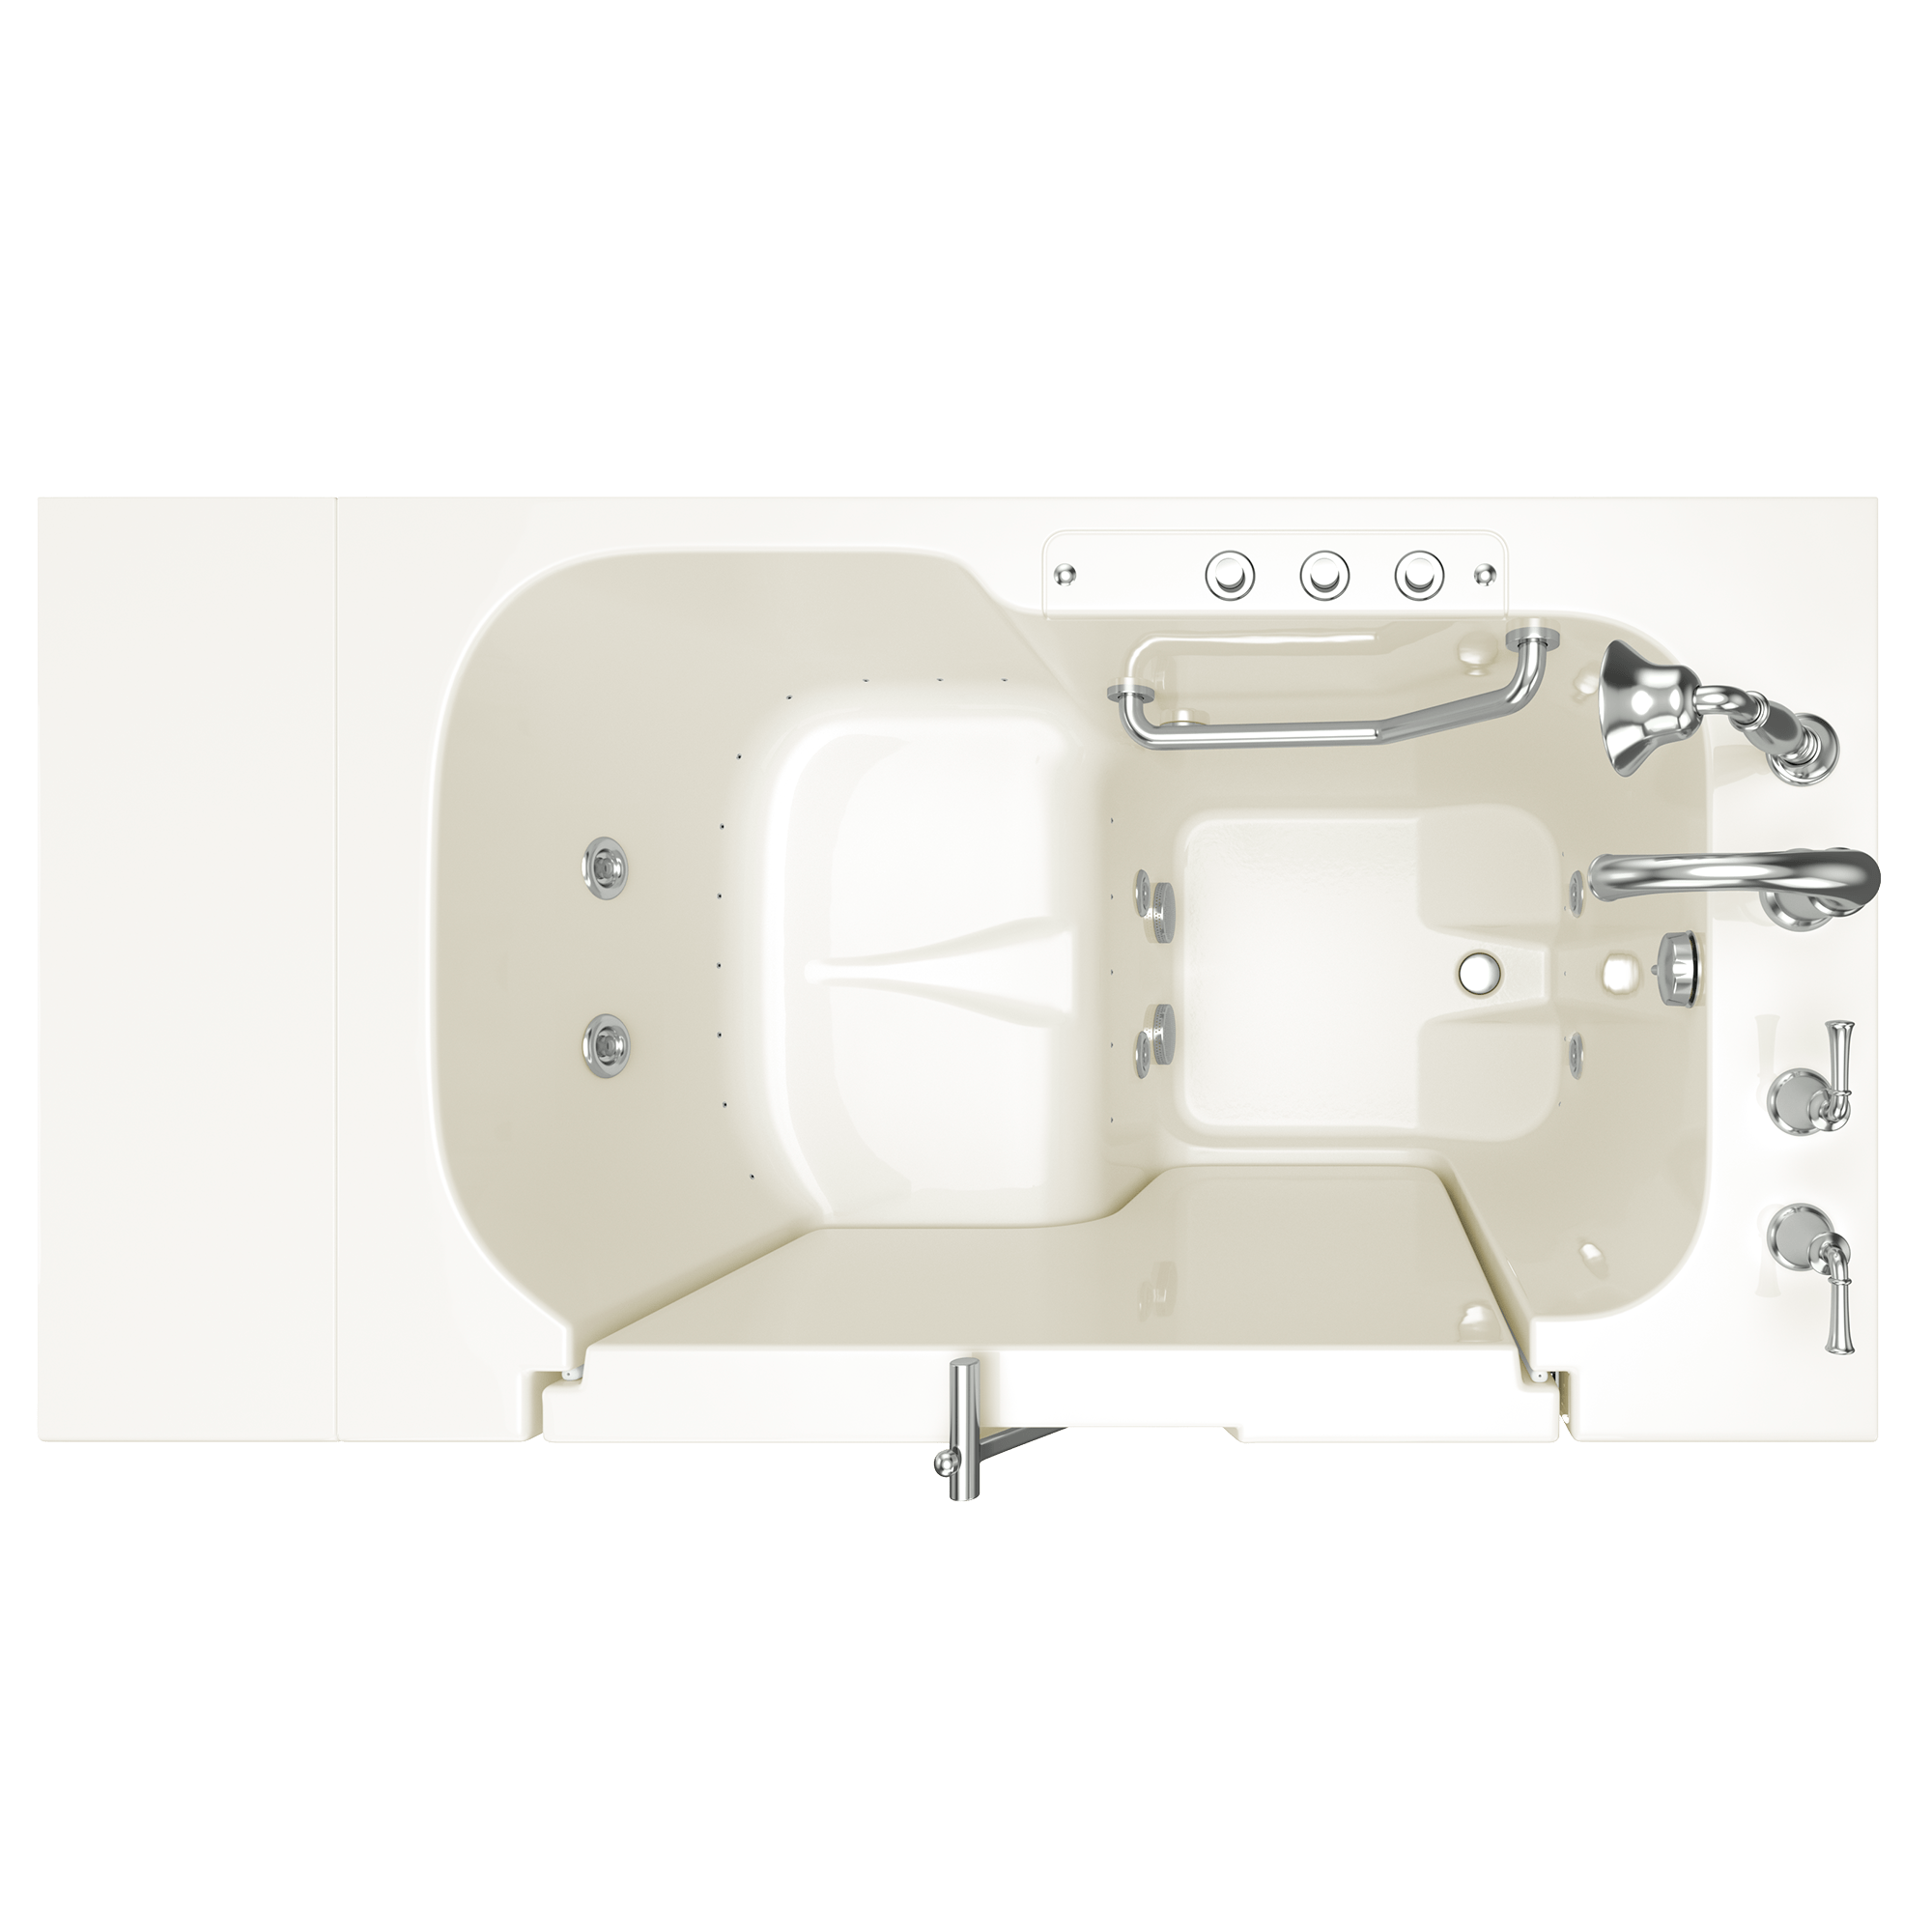 Gelcoat Value Series 32 x 52 -Inch Walk-in Tub With Combination Air Spa and Whirlpool Systems - Right-Hand Drain With Faucet